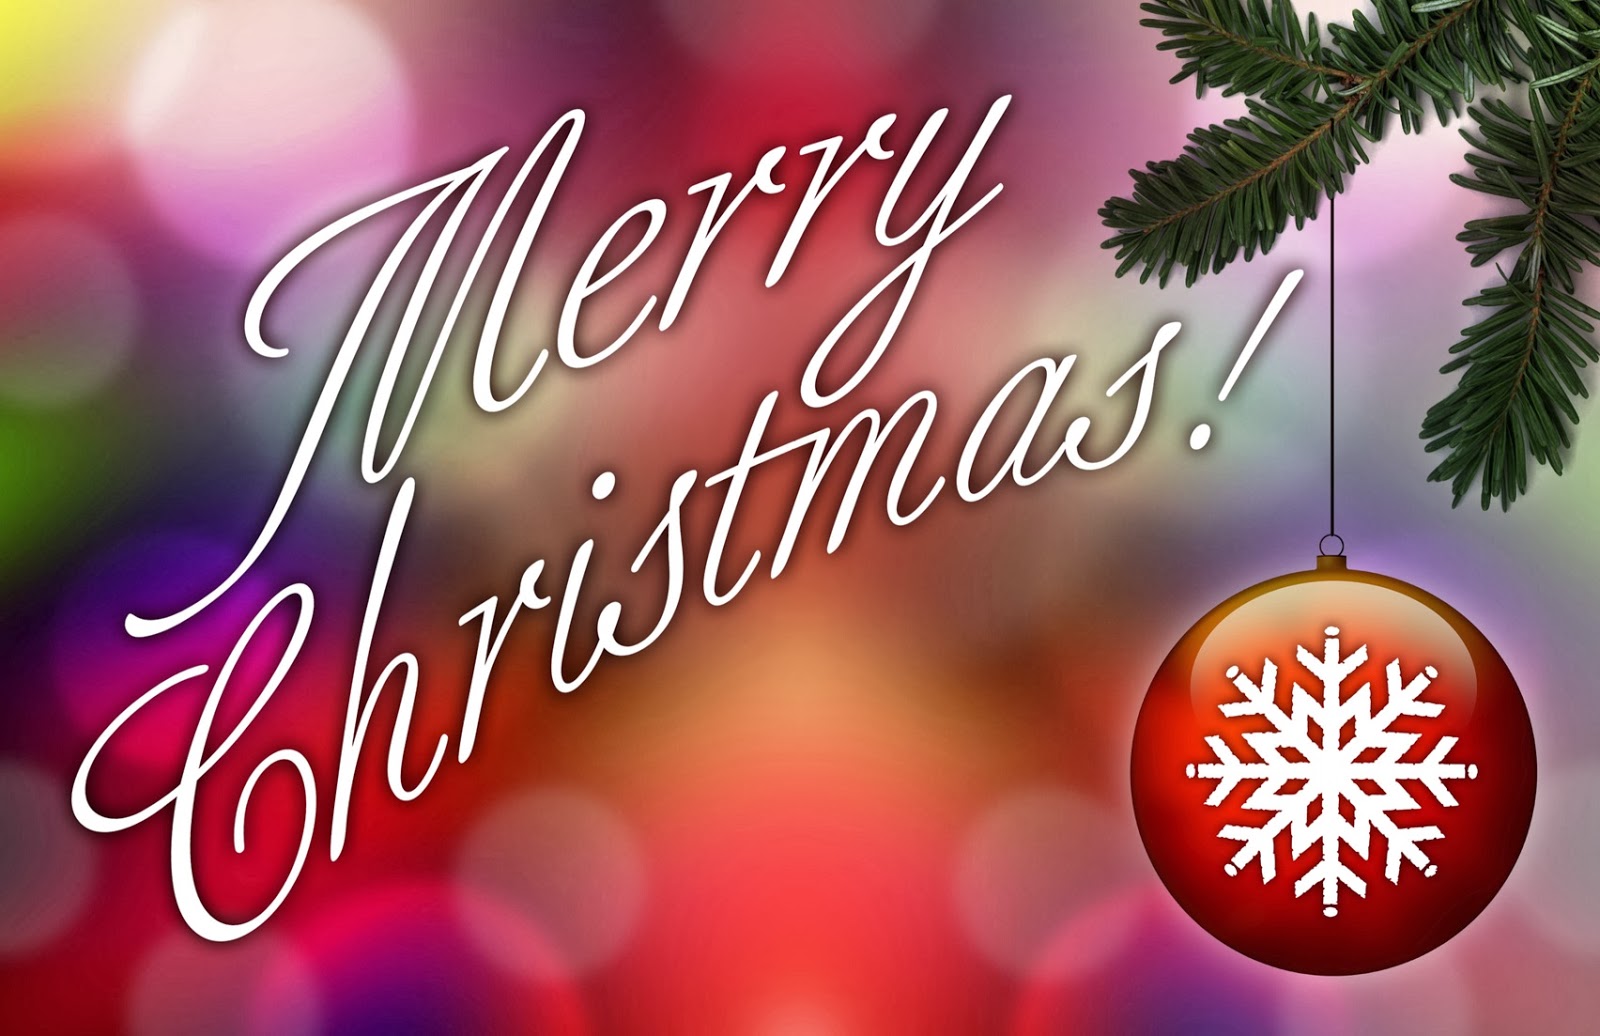 Best Merry Christmas 2013 wishes Quotes and Poetry Messages for